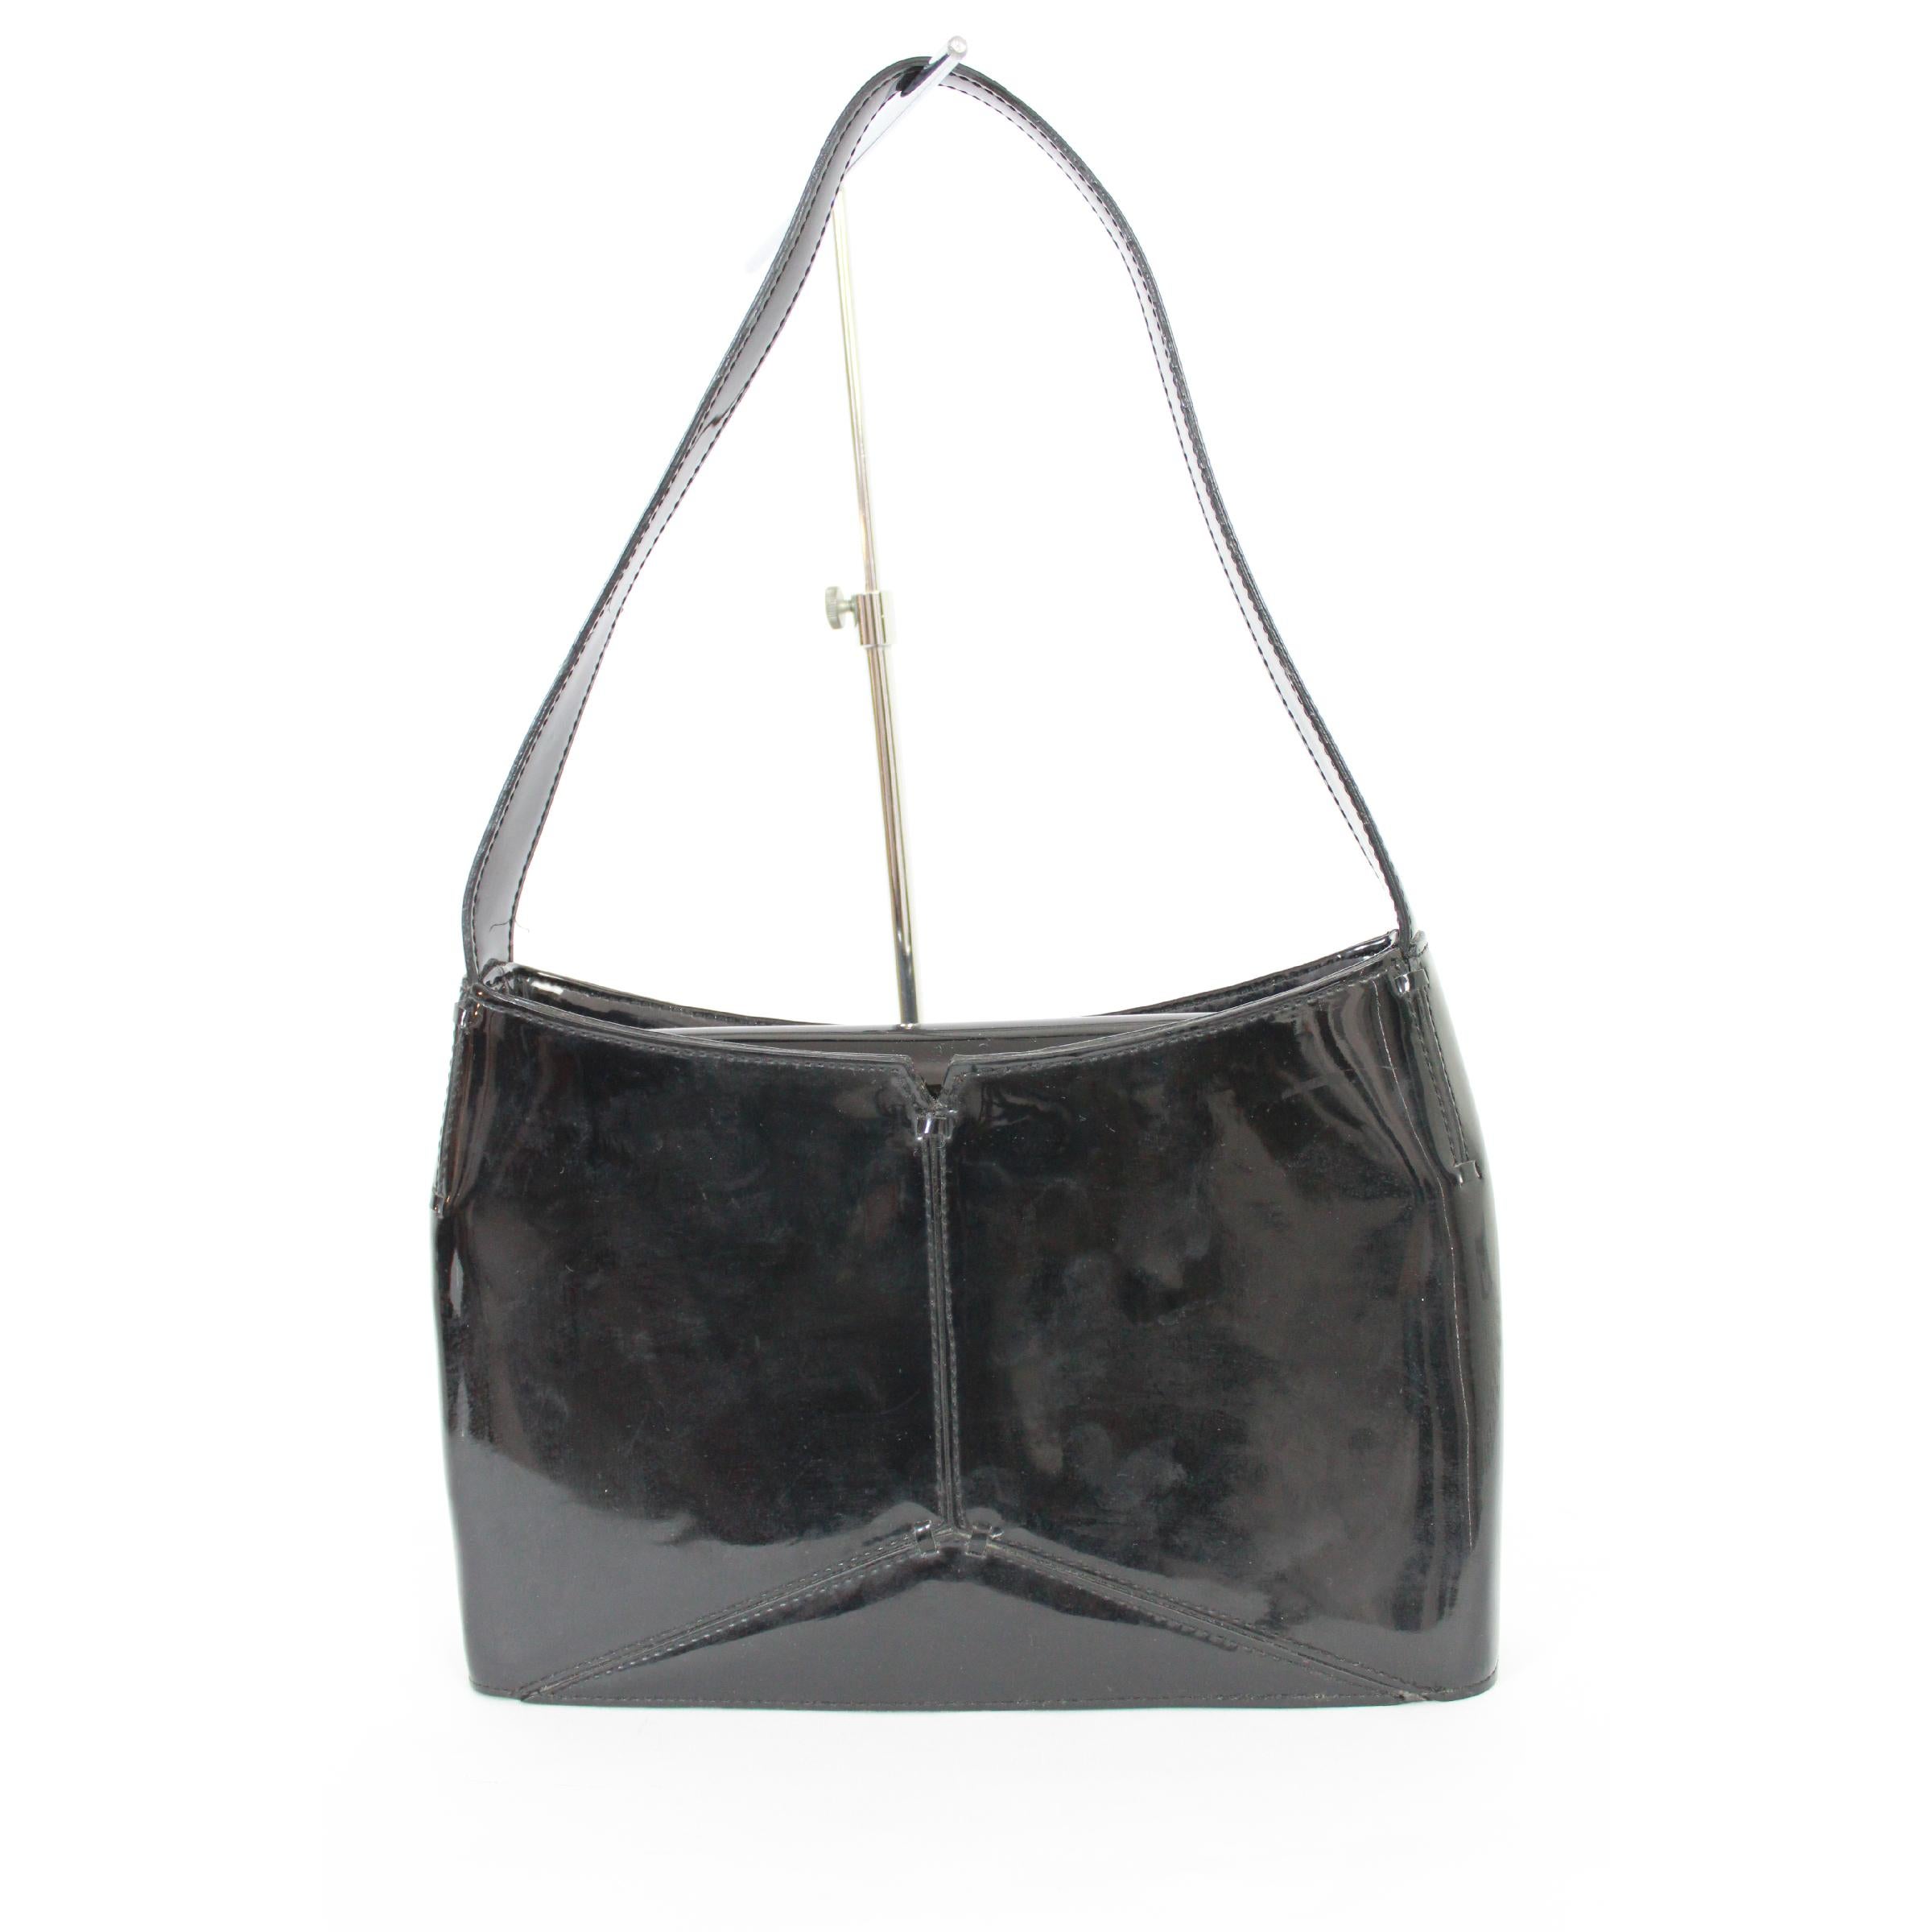 Karan New York woman vintage 2000s shoulder bag. Rigid black patent leather bag, internal dividers. Clip button closure. Very good vintage conditions, some imperceptible imperfections.

Height: 16 cm

Width: 26 cm

Depth: 6 cm

Handle height: 22 cm